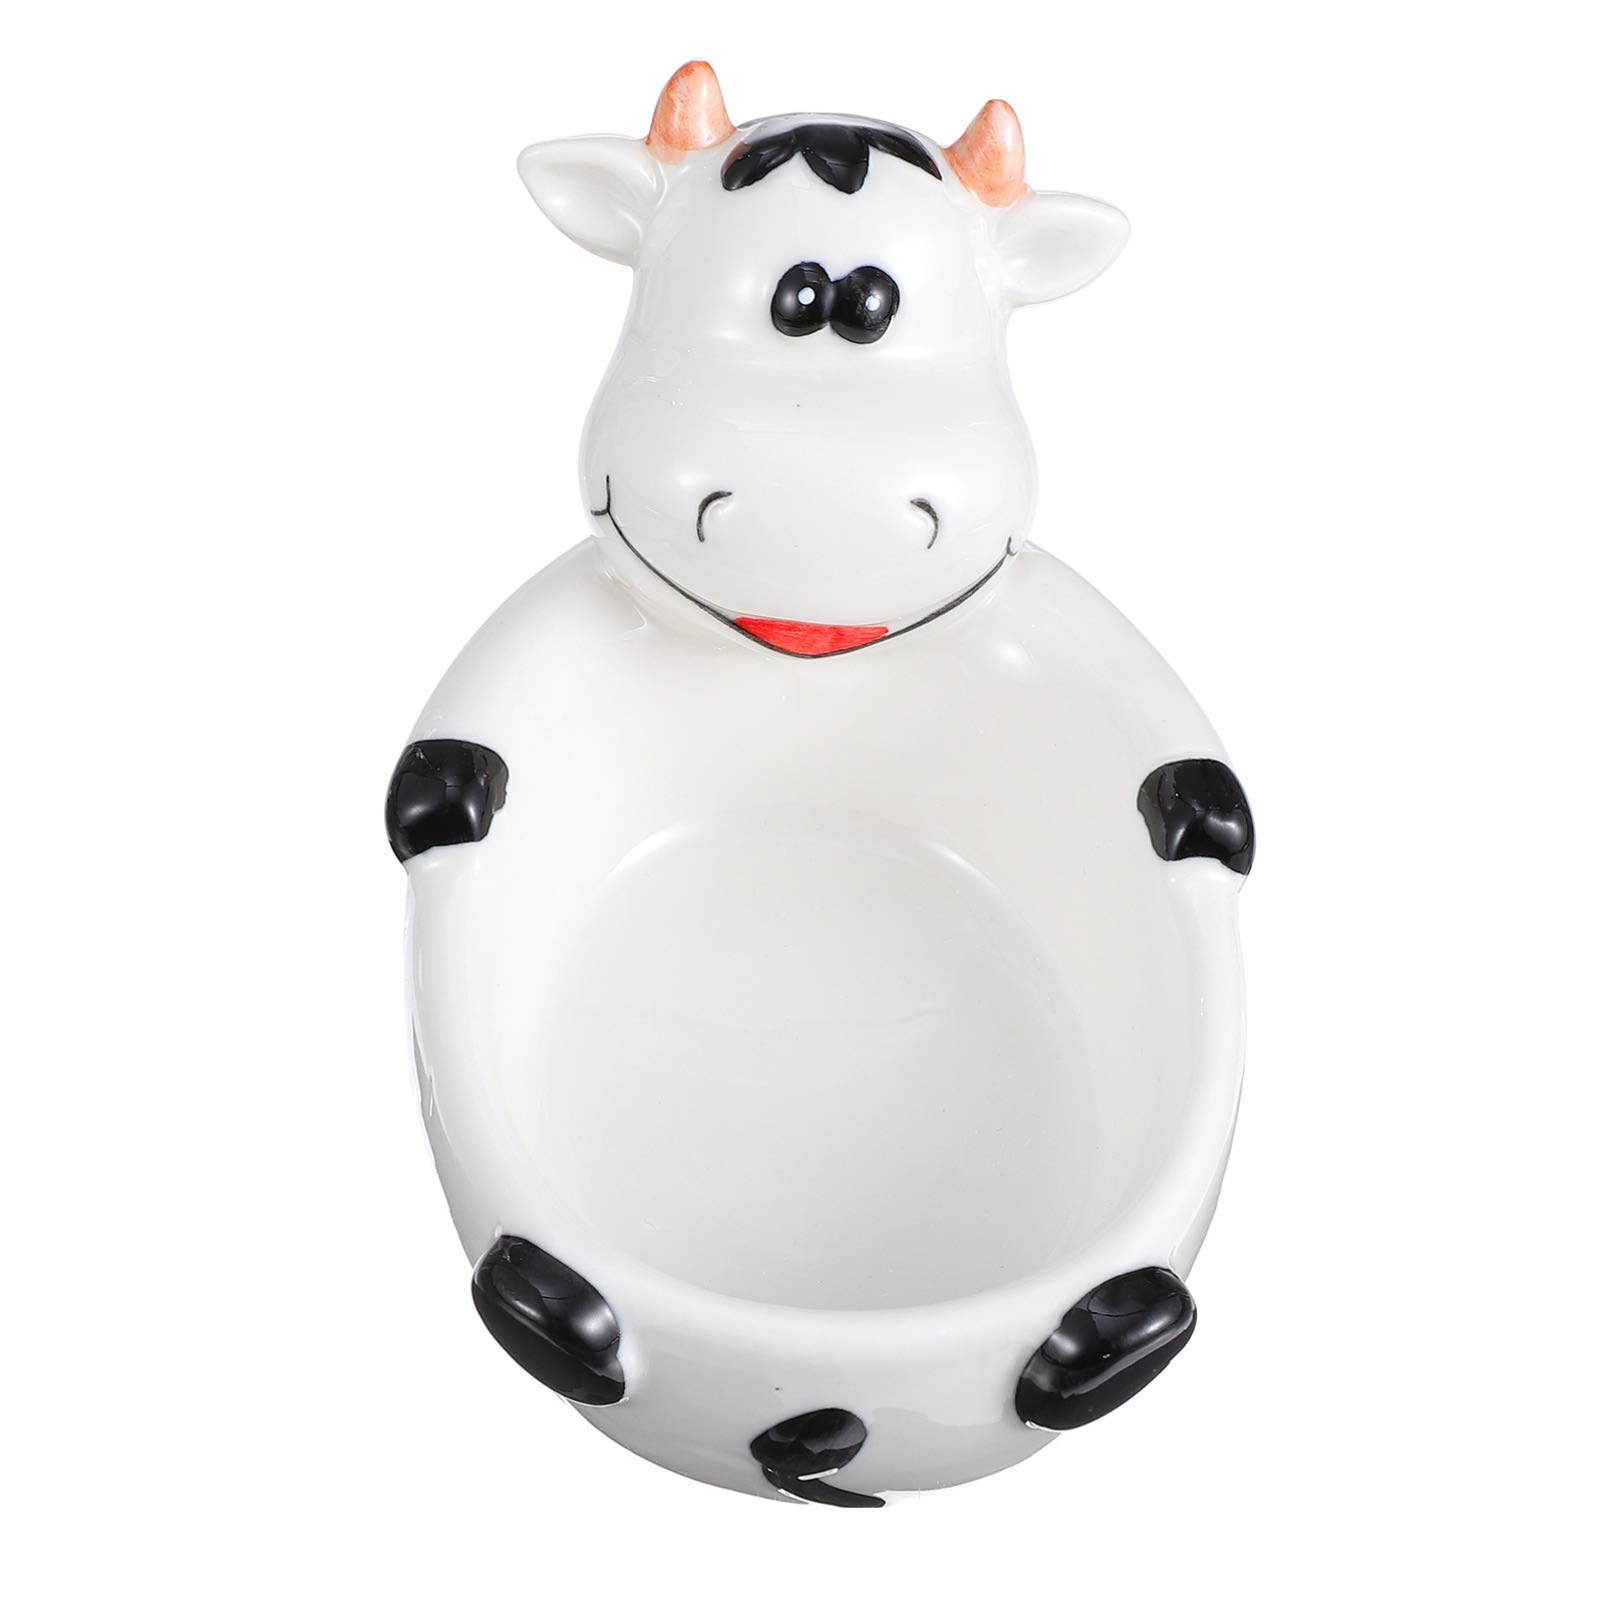 DOITOOL Ceramic Salad Bowl Cereal Bowl Dishes and Plates Creative Fruit Plate Animal Cow Decorative Storage Bowls Porcelain Bowls for Kitchen Bowl for Desserts Candy